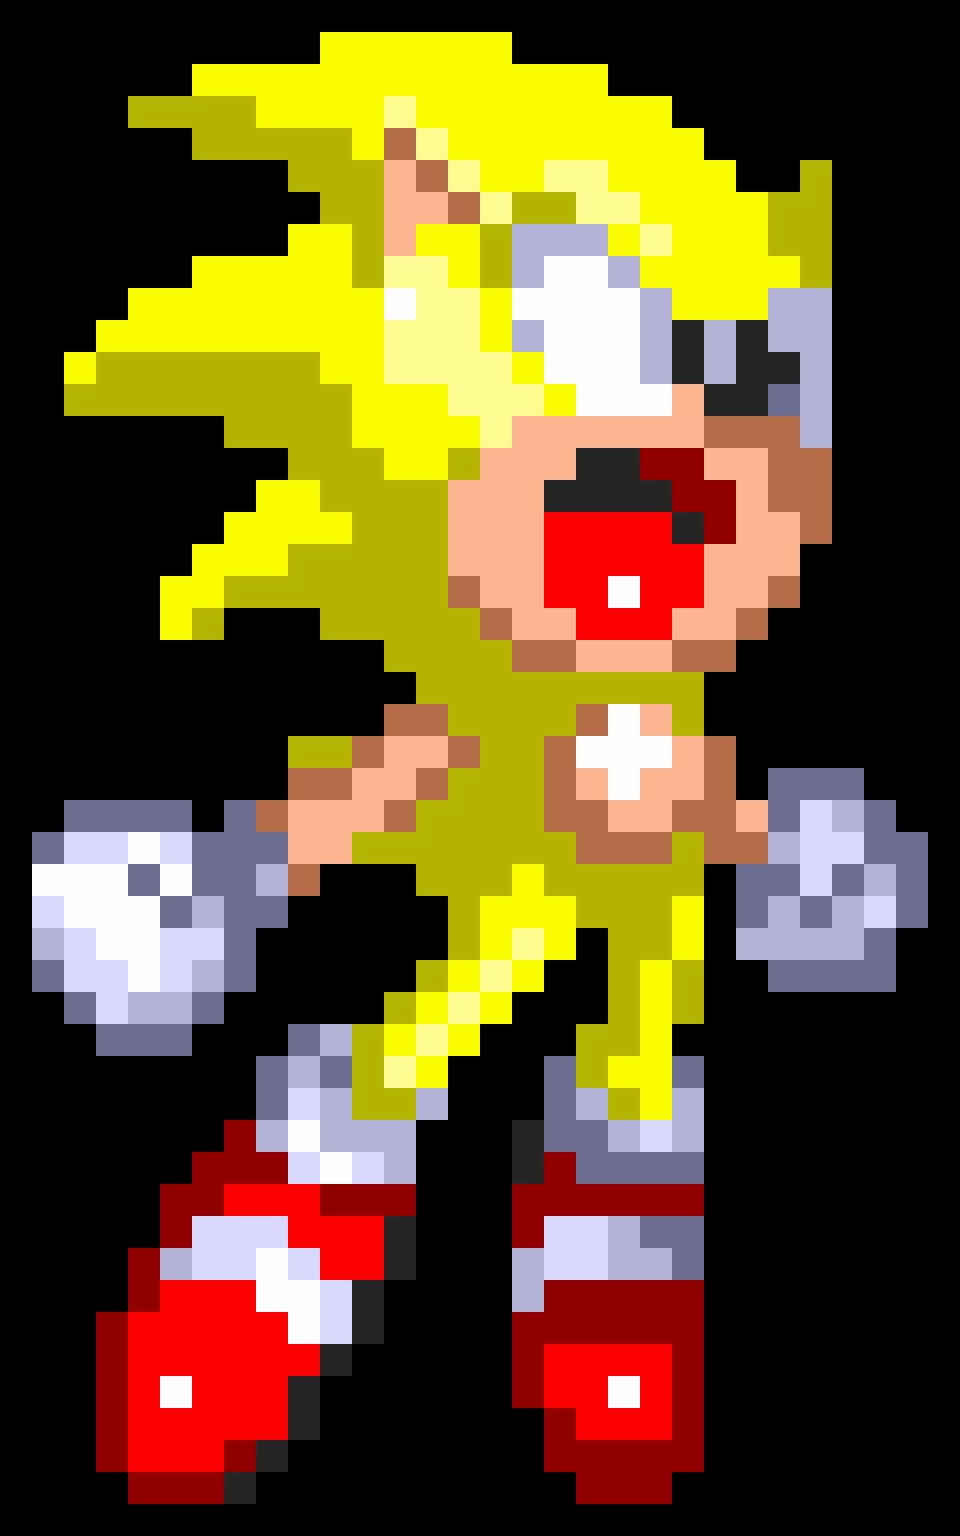 Characters Go Super Then Hyper [Sonic 3 A.I.R.] [Mods]